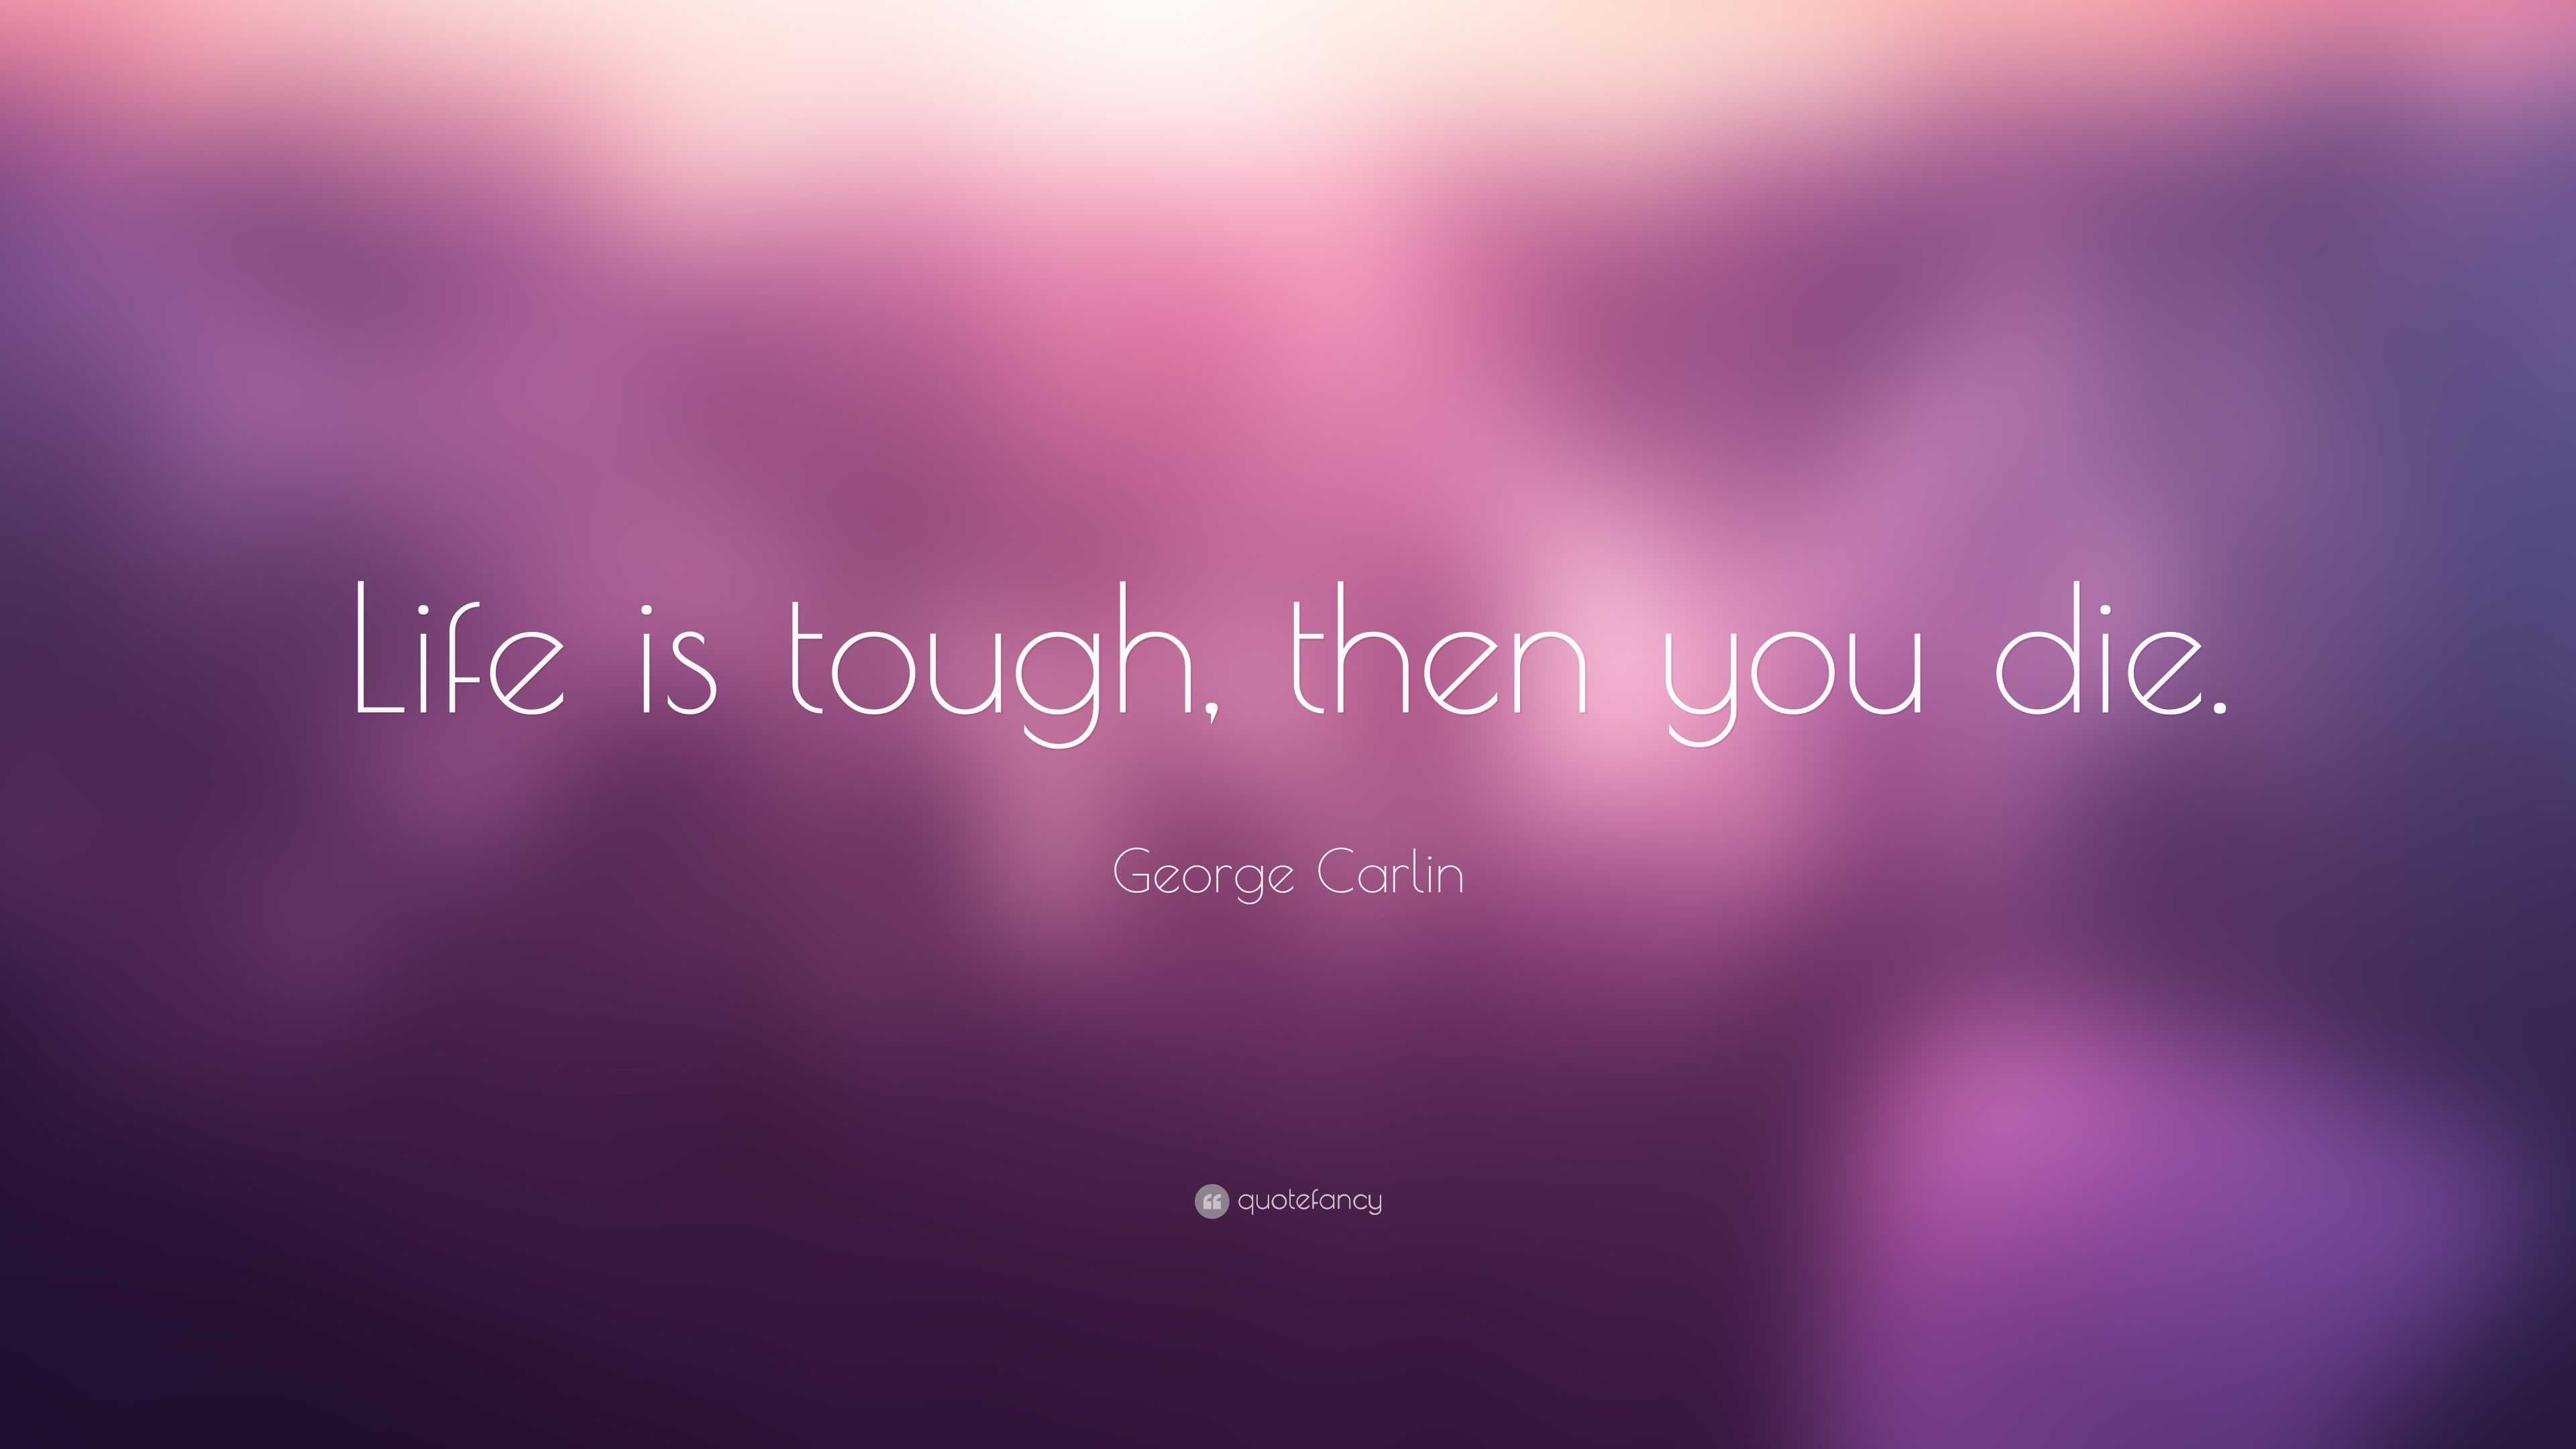 life is tough quote george carlin quote u201clife is tough then you u201d 7 wallpapers